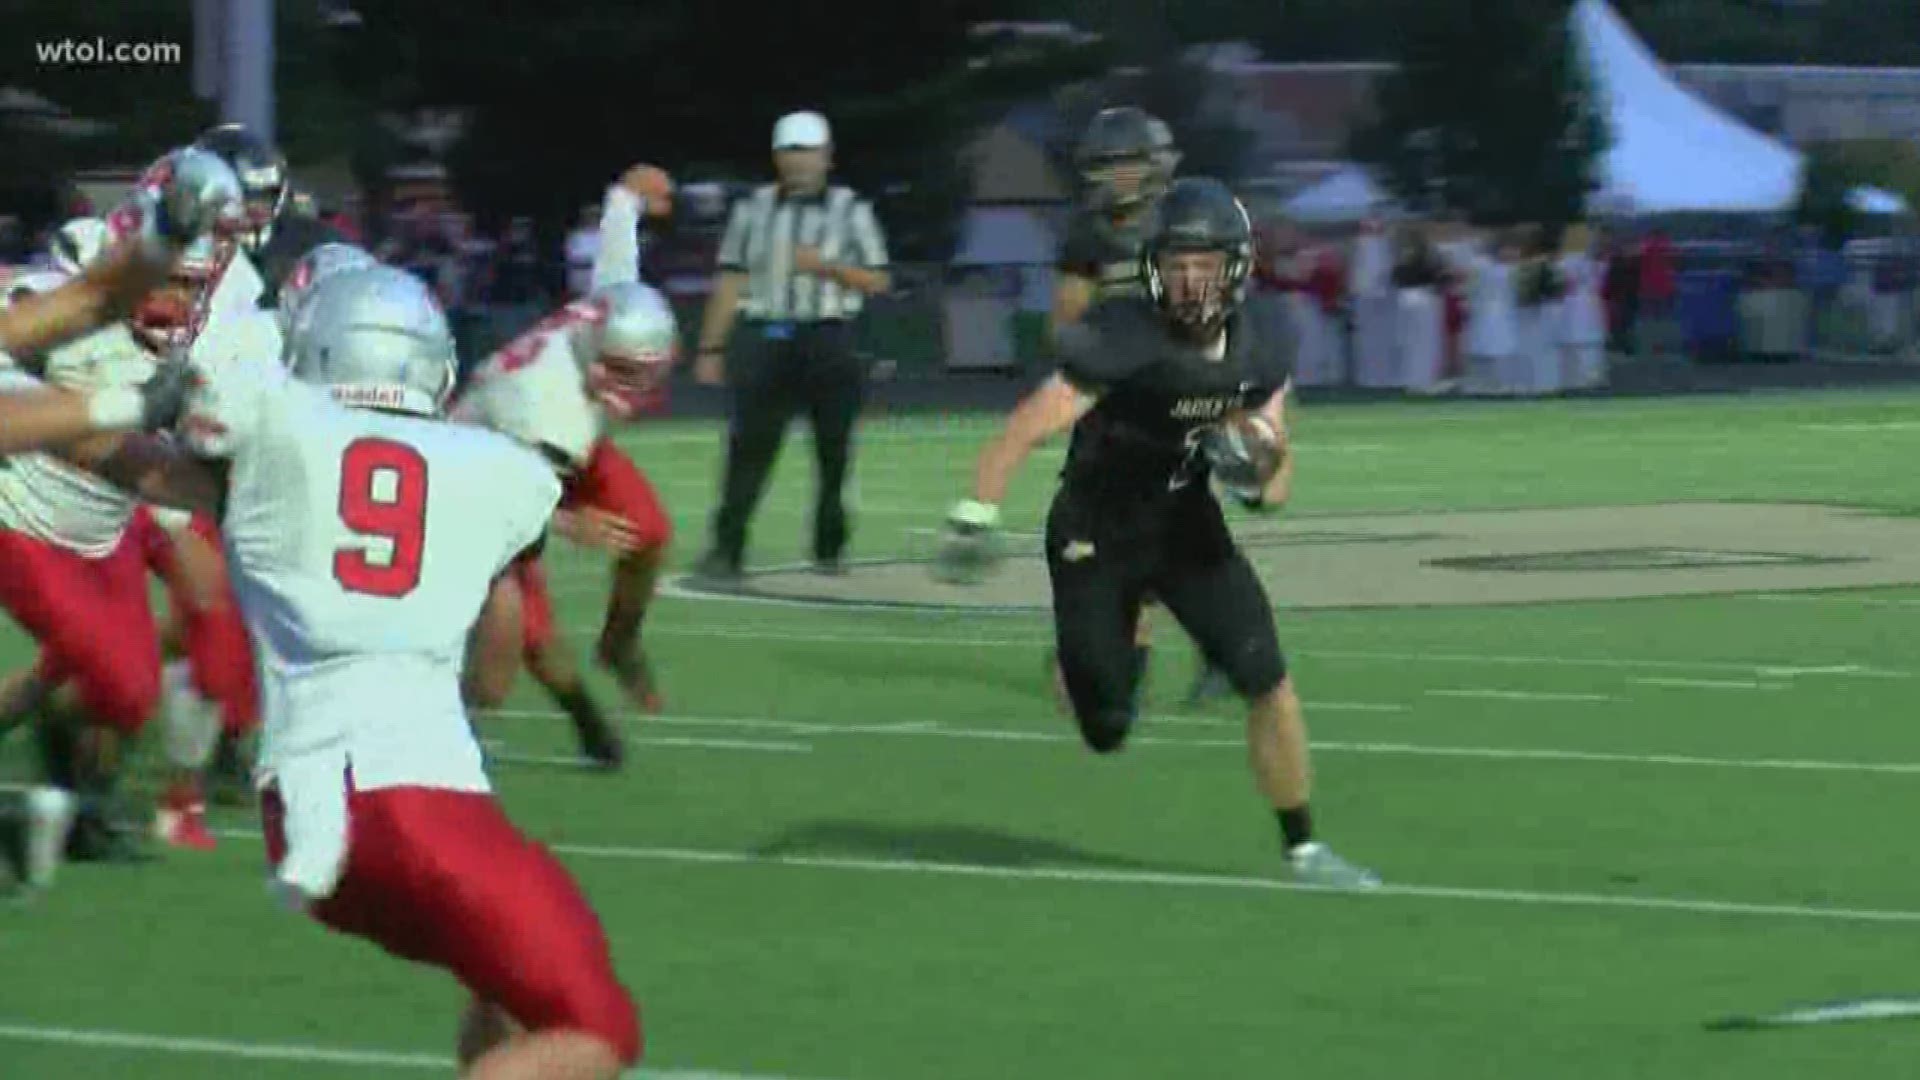 Perrysburg seeks for a fresh start this season after being bit by the injury bug last year. Players last year gained experience from the injuries, Coach Kregel says.